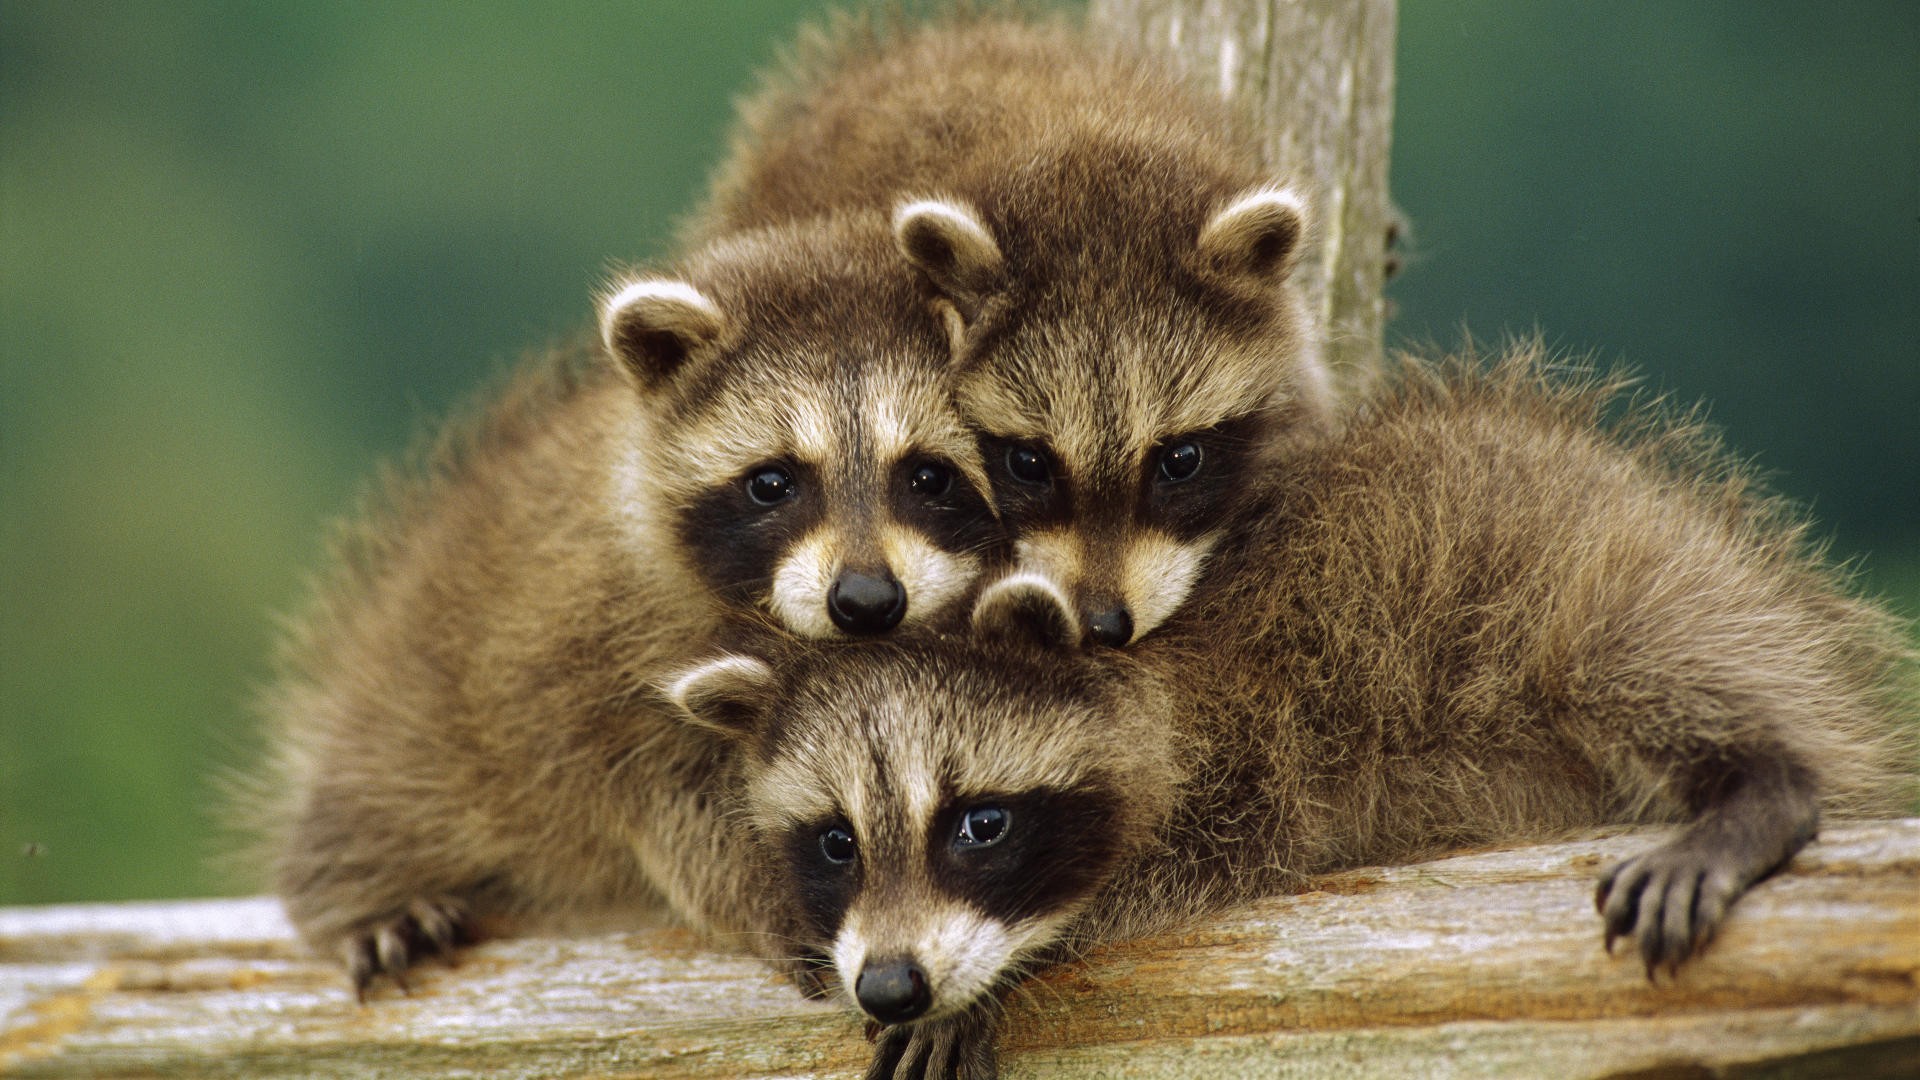 Raccoon s for desktop download free raccoon pictures and backgrounds for pc